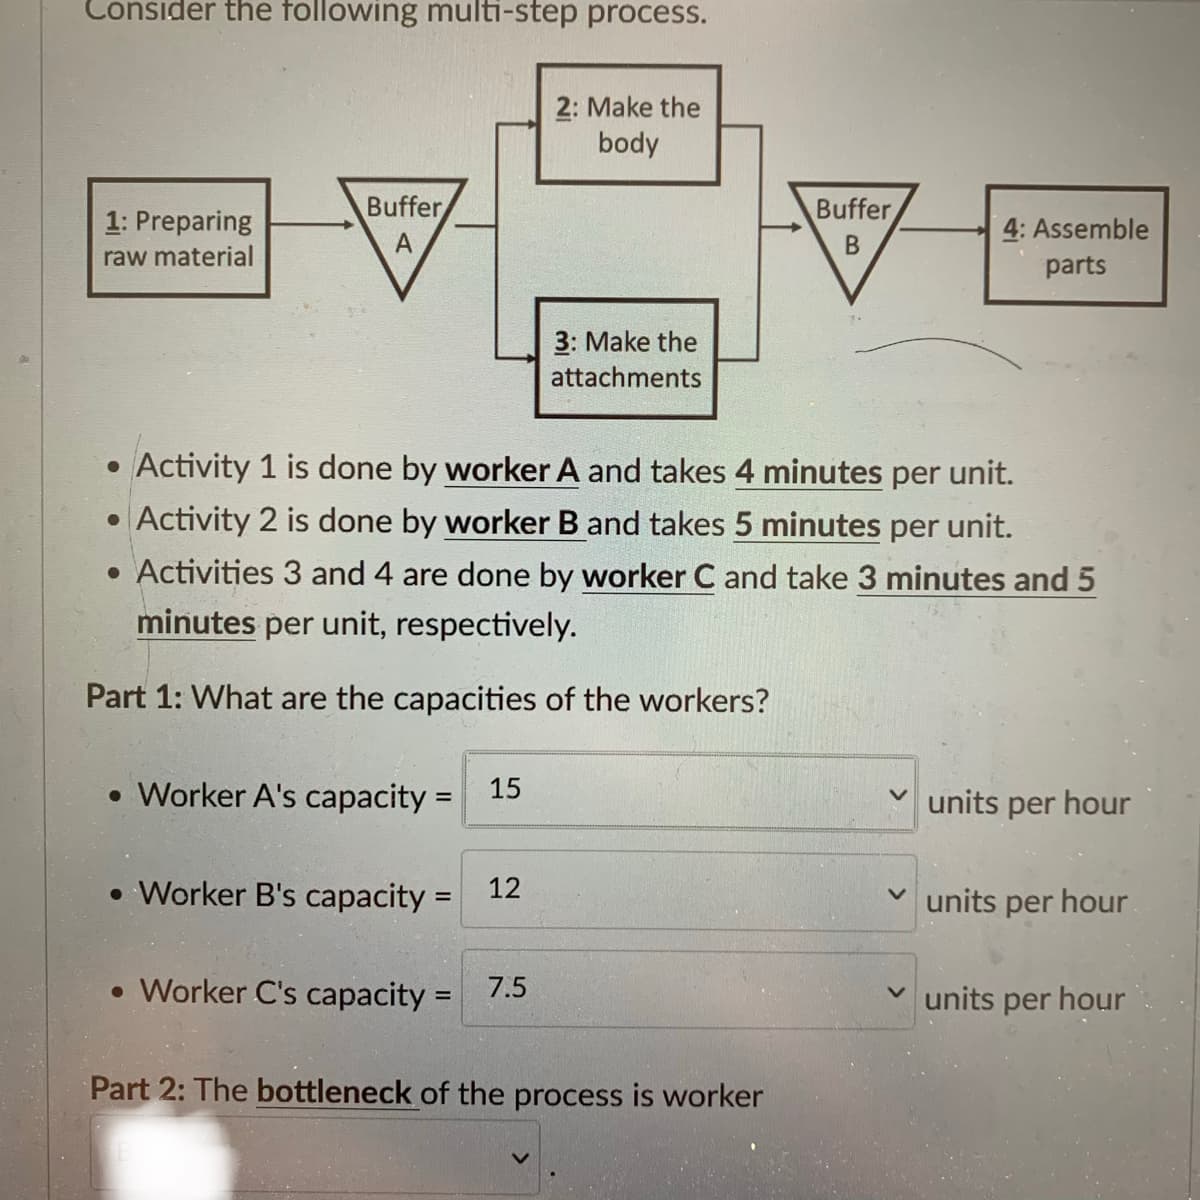 Consider the following multi-step process.
1: Preparing
raw material
Buffer
A
●
• Worker A's capacity = 15
• Worker B's capacity=
Activity 1 is done by worker A and takes 4 minutes per unit.
• Activity 2 is done by worker B and takes 5 minutes per unit.
• Activities 3 and 4 are done by worker C and take 3 minutes and 5
minutes per unit, respectively.
Part 1: What are the capacities of the workers?
12
2: Make the
body
• Worker C's capacity = 7.5
3: Make the
attachments
Buffer
B
Part 2: The bottleneck of the process is worker
4: Assemble
parts
✓units per hour
units per hour
units per hour